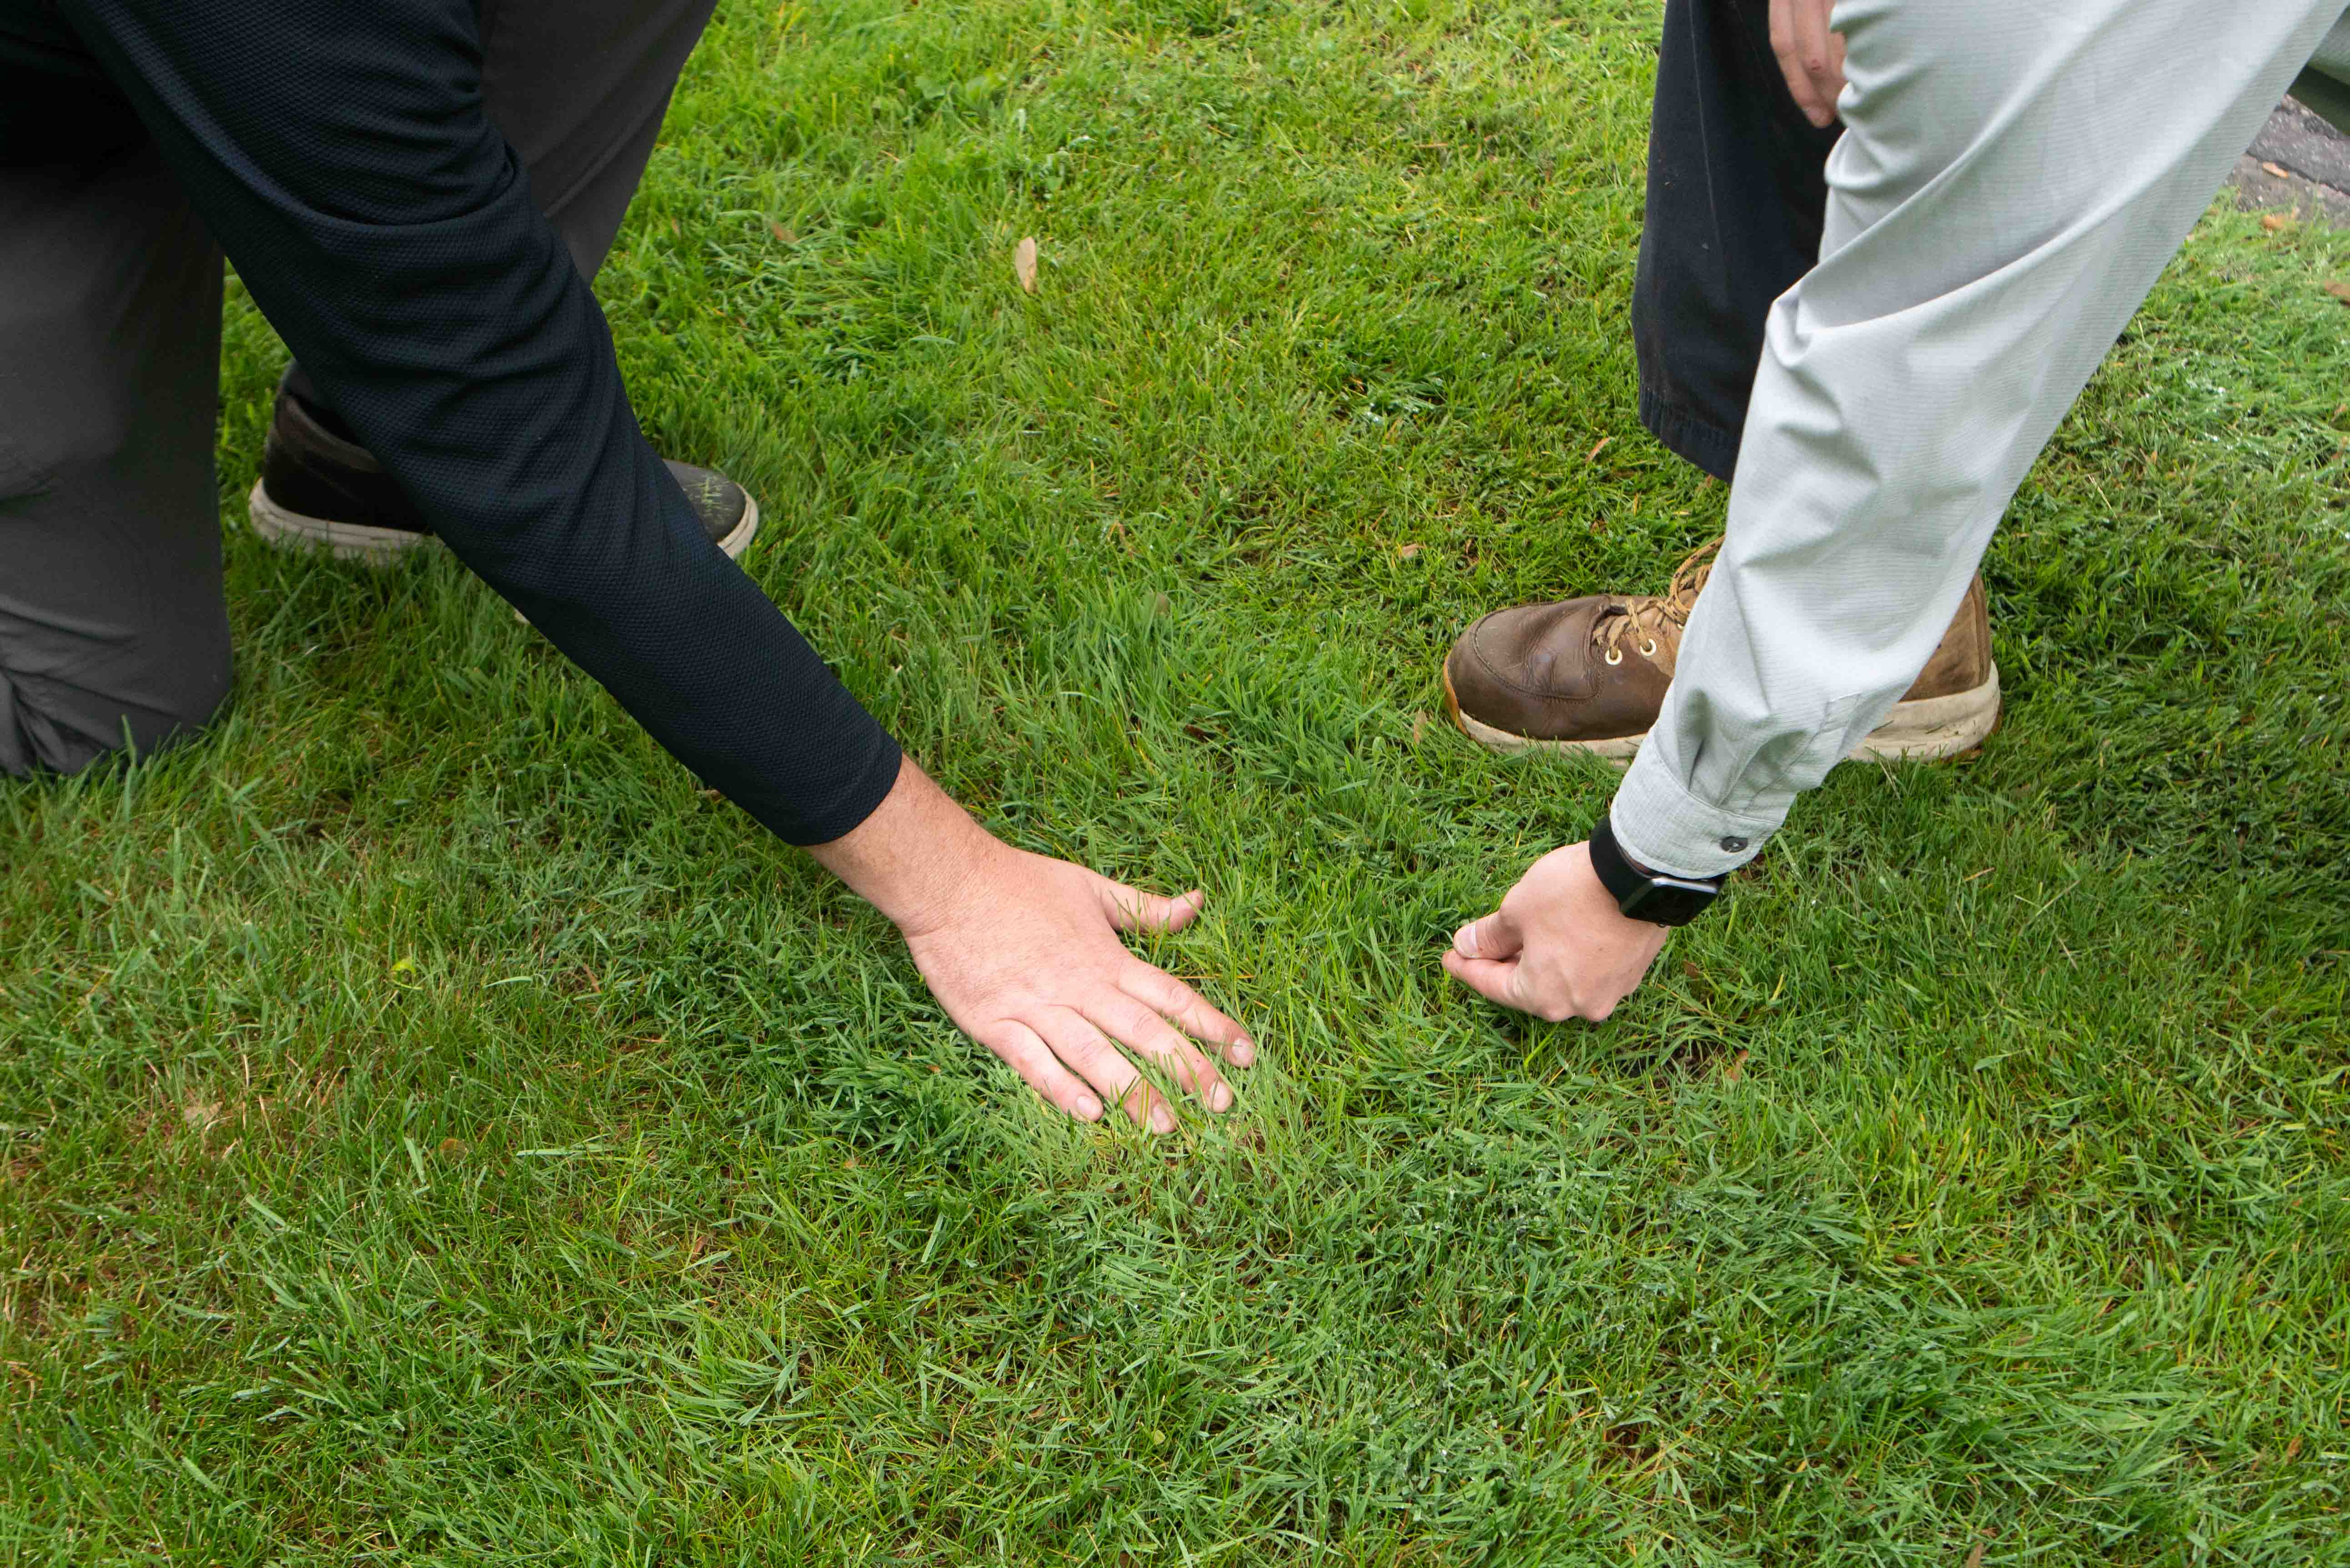 technicians examining lawn up close for disease 